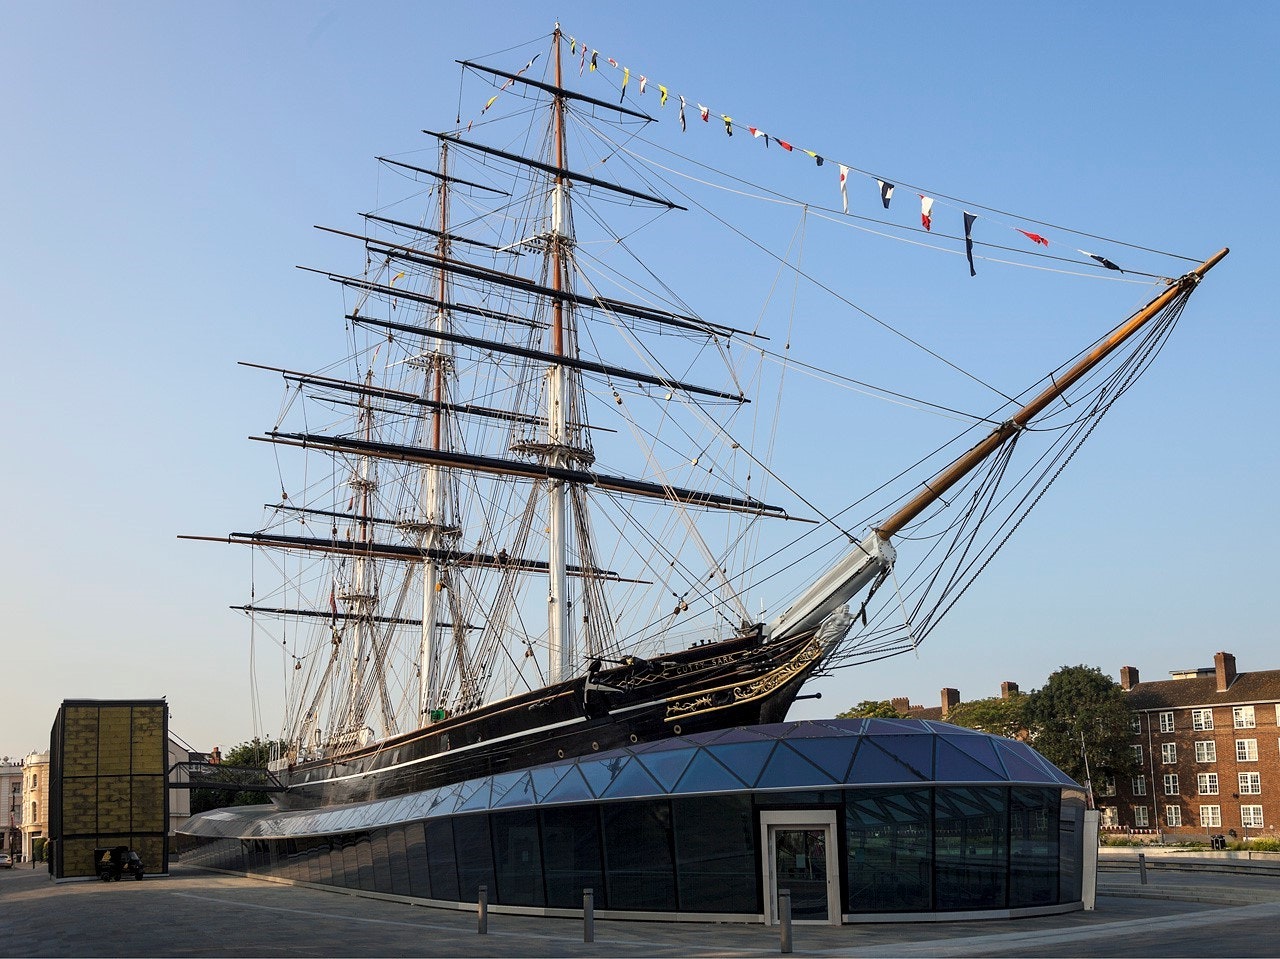 Cutty Sark - The Weather Deck image 1